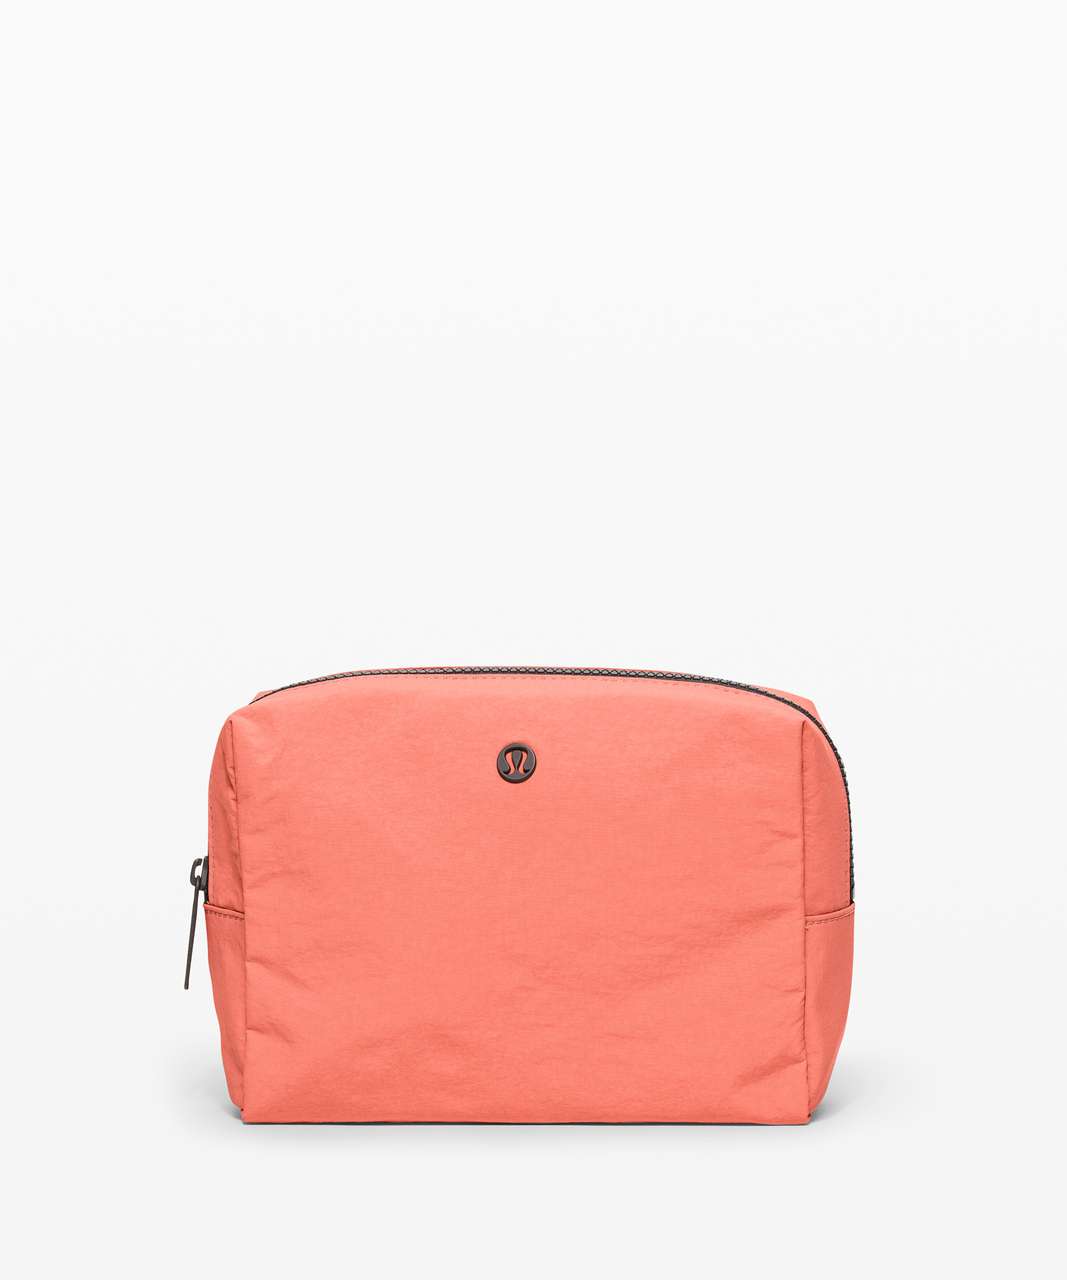 Lululemon All Your Small Things Pouch *4L - Copper Clay - lulu fanatics